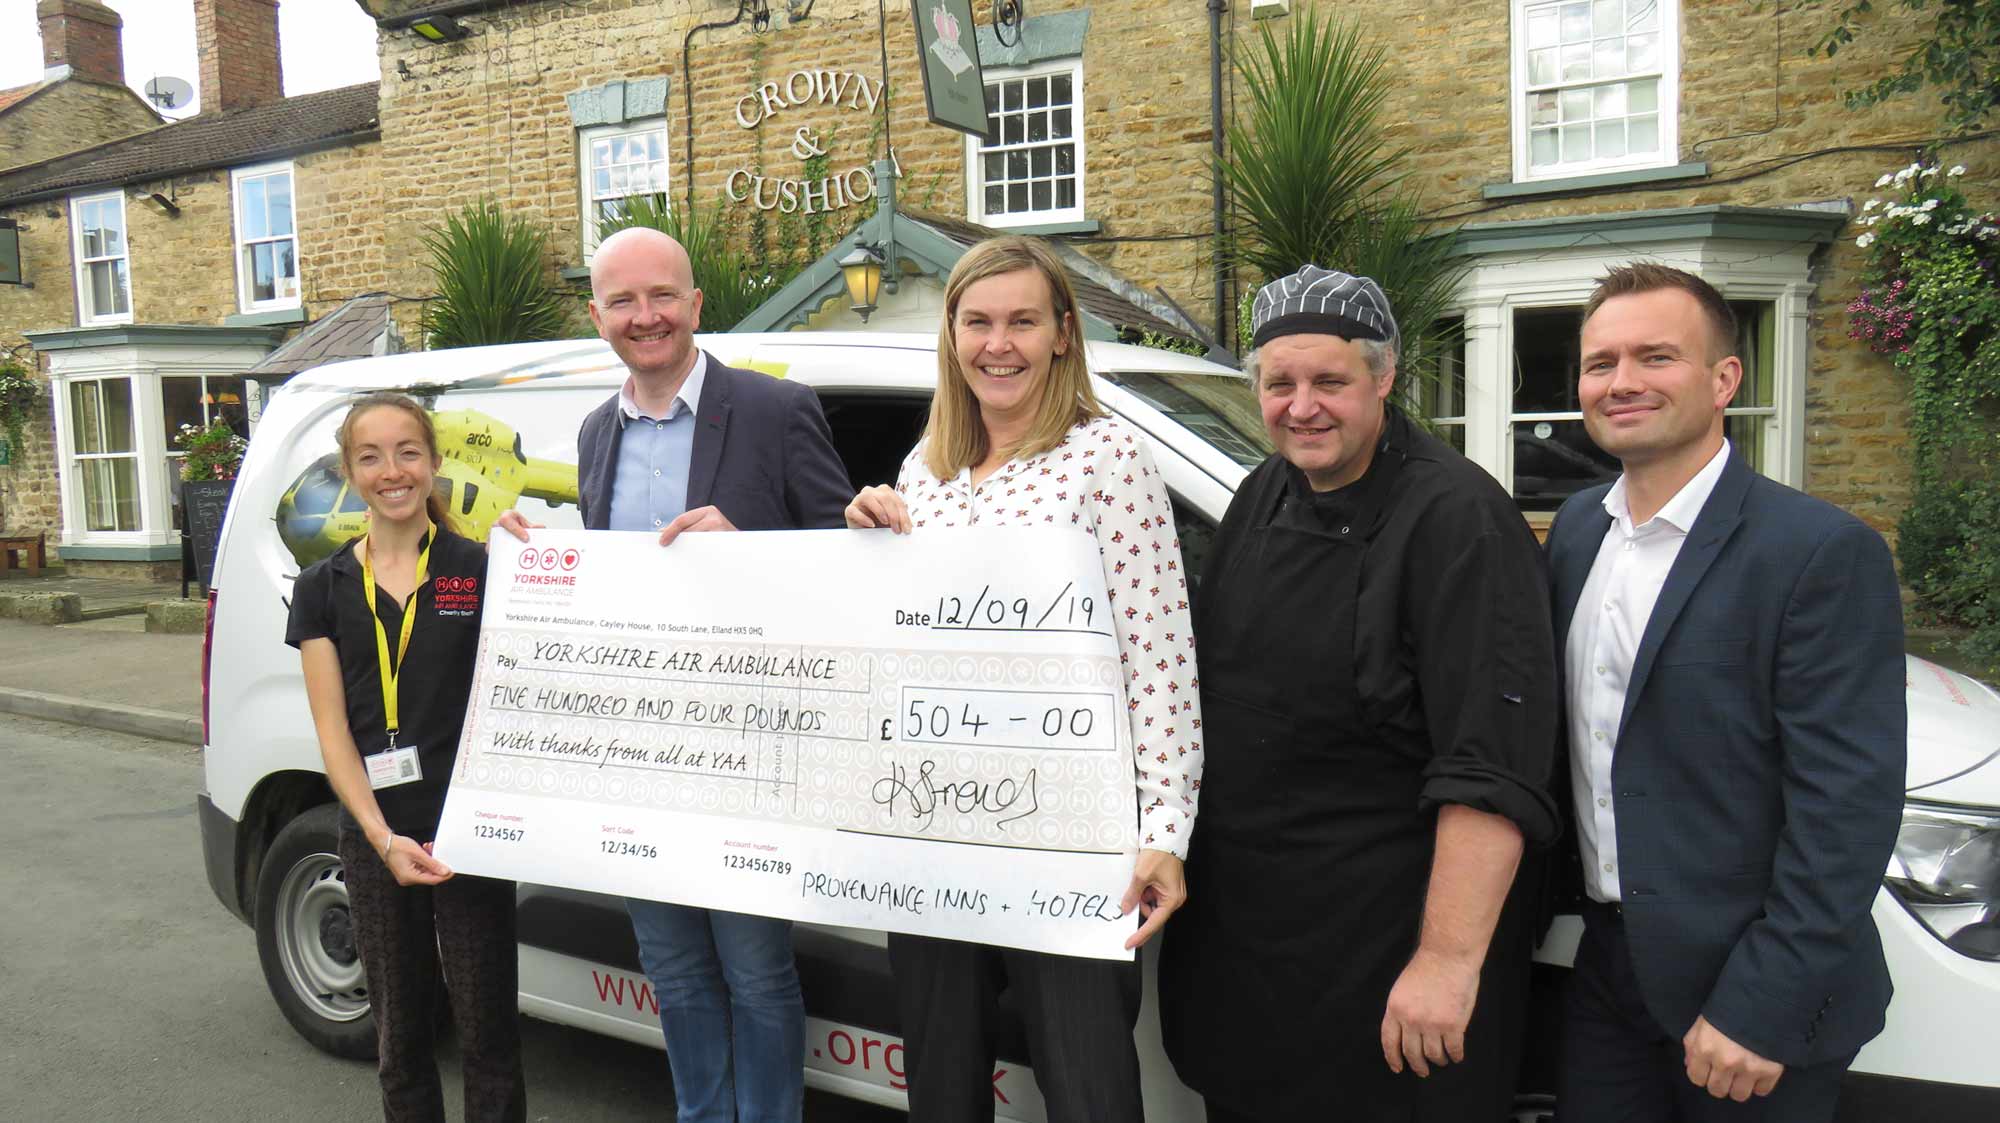 Presentation of the cheque at the Crown & Cushion, Welburn Left to right Olivia Mulligan – Yorkshire Air Ambulance Jason Wardill – Group Chef Provenance Inns & Hotels Karen French – Operations Director Provenance Inns & Hotels Justin Browning – Head Chef The Crown & Cushion Darren Noyland– General Manager The Crown & Cushion